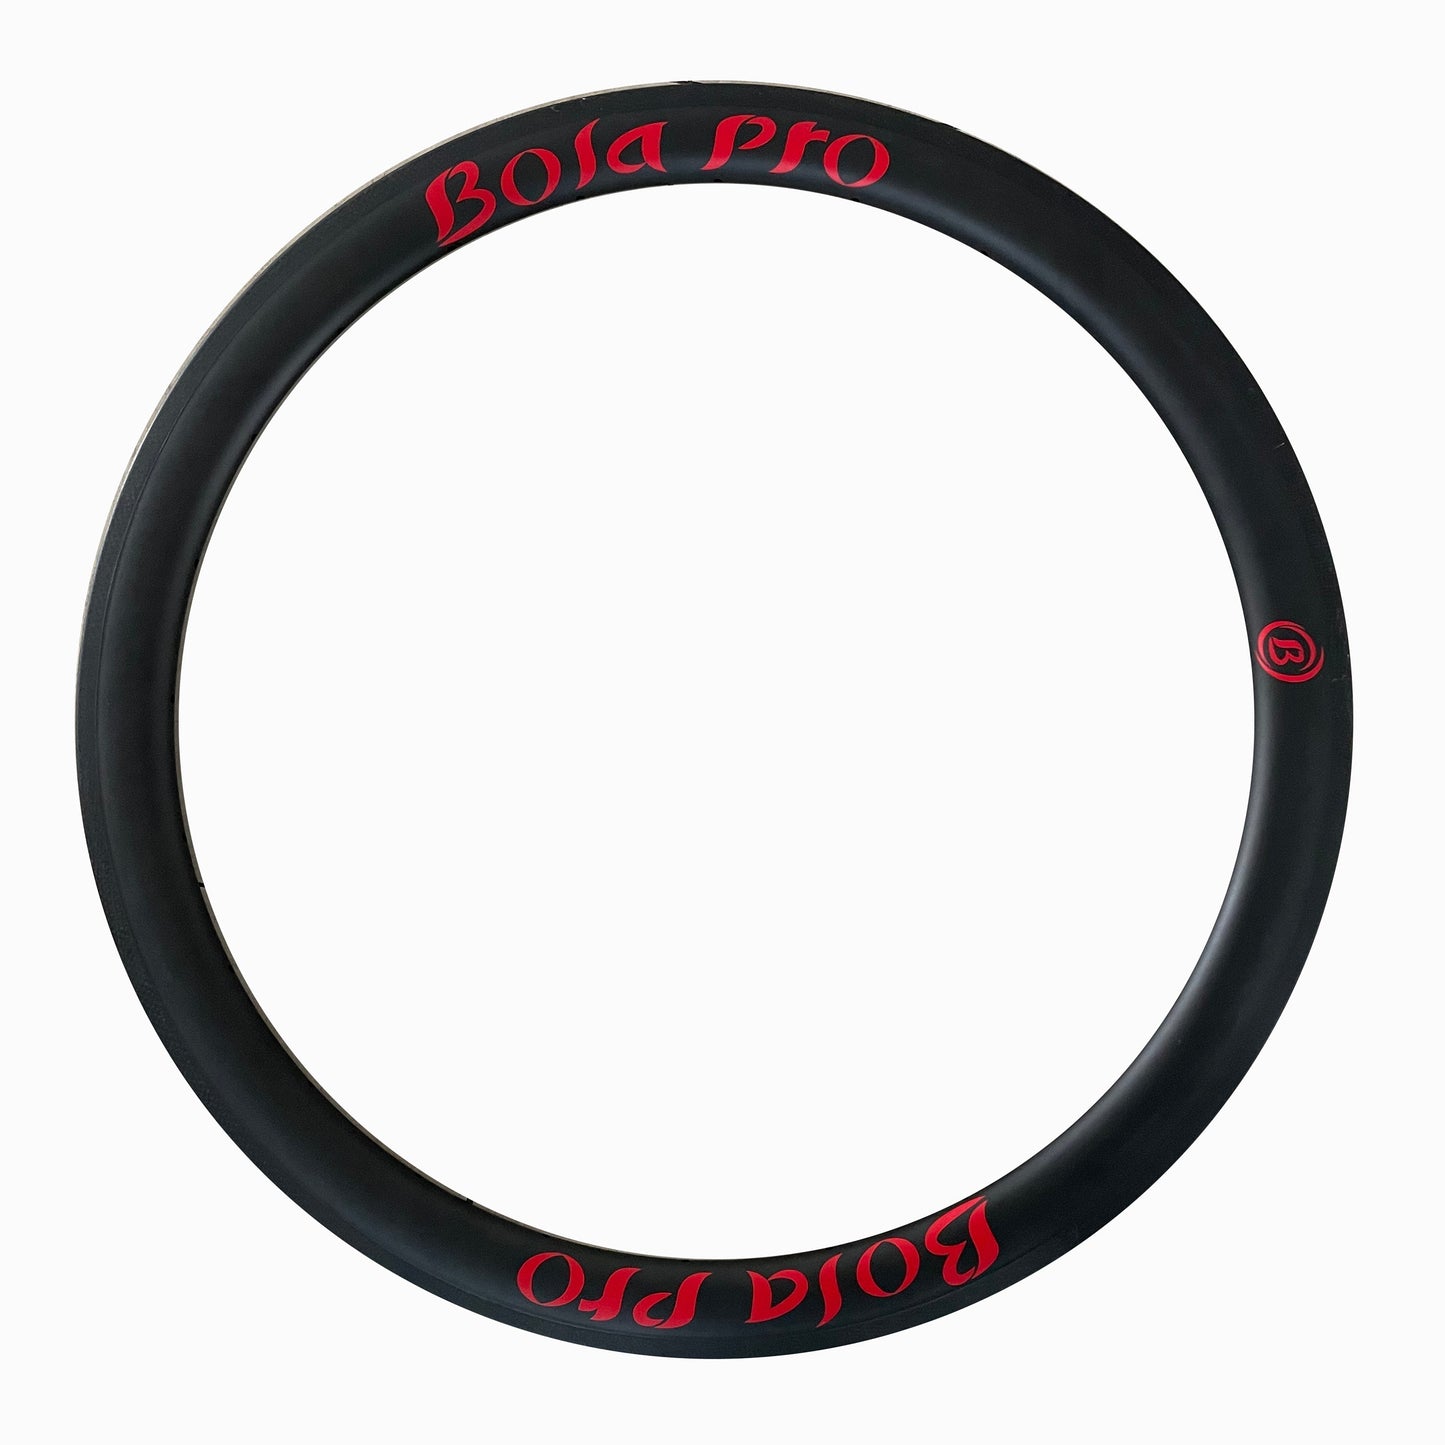 29er MTB carbon asymmetric bicycle rim 30mm profile 27mm inner wide for cross-country or all mountain,Superlight optional Bola